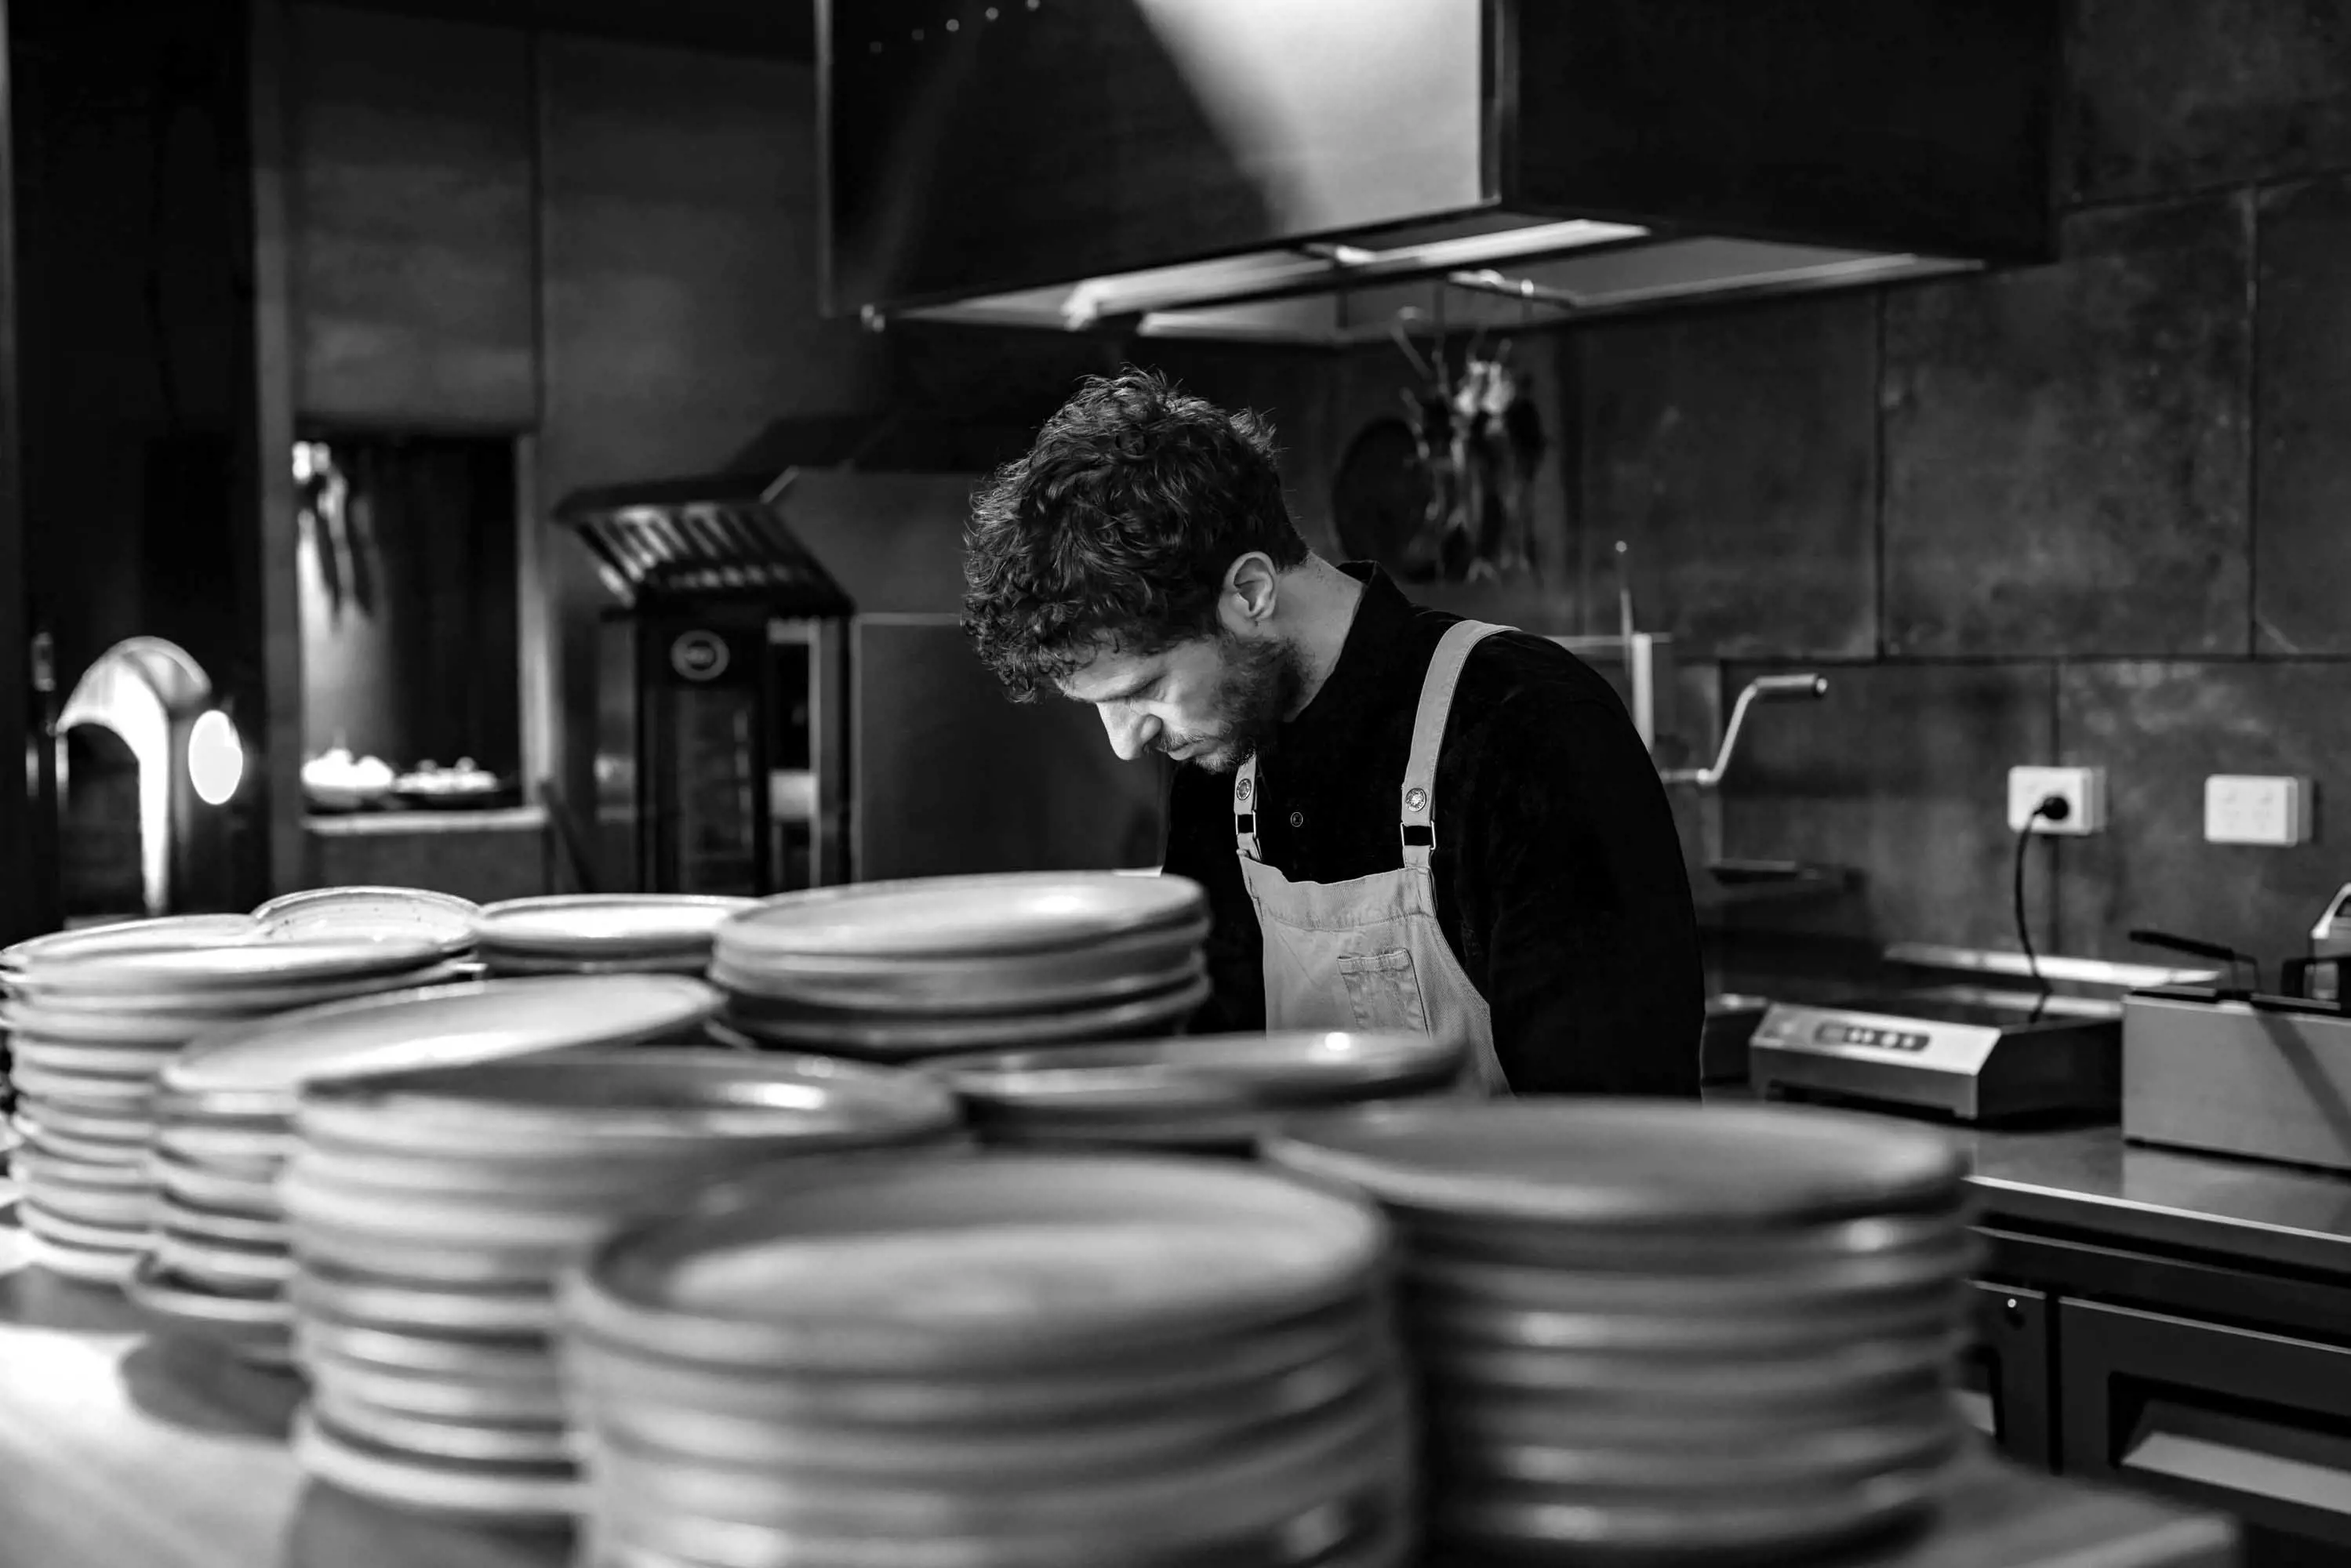 A chef concentrates on preparation behind the counter stacked with plates in a large open kitchen.